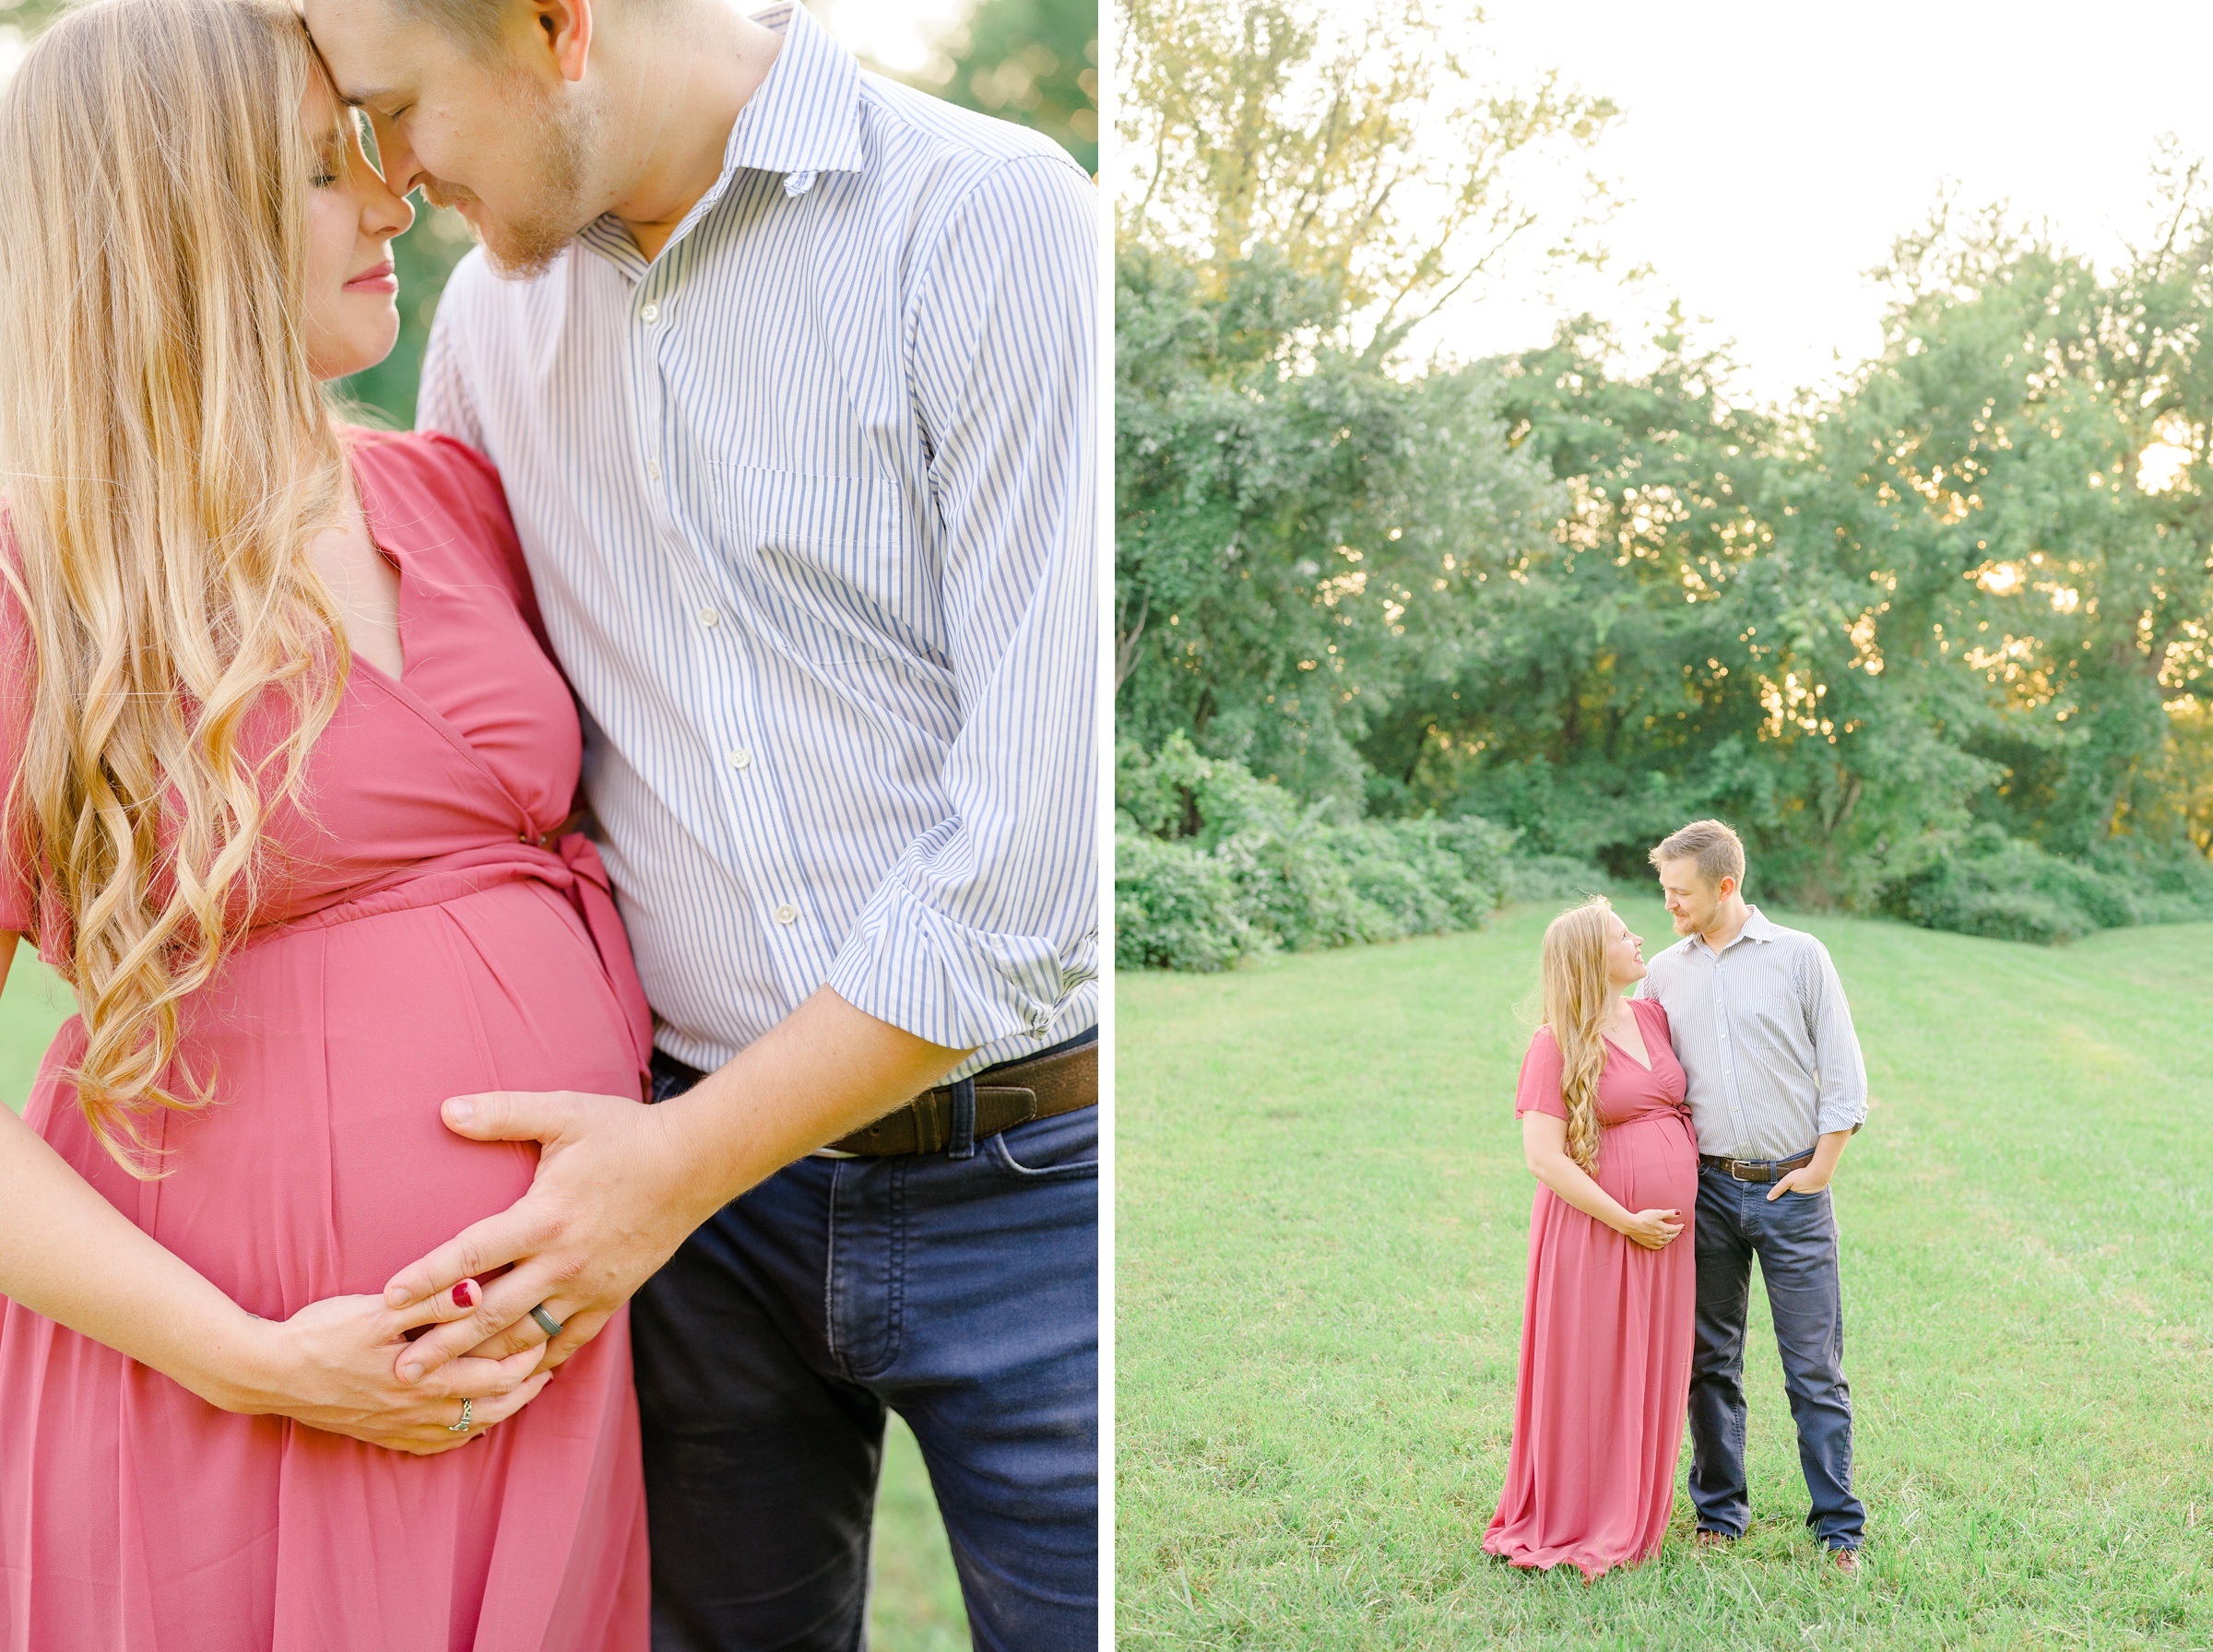 Maternity and family portrait session at Jones Point Park in Alexandria, Virginia photographed by Baltimore Maternity Photographer Cait Kramer Photography.